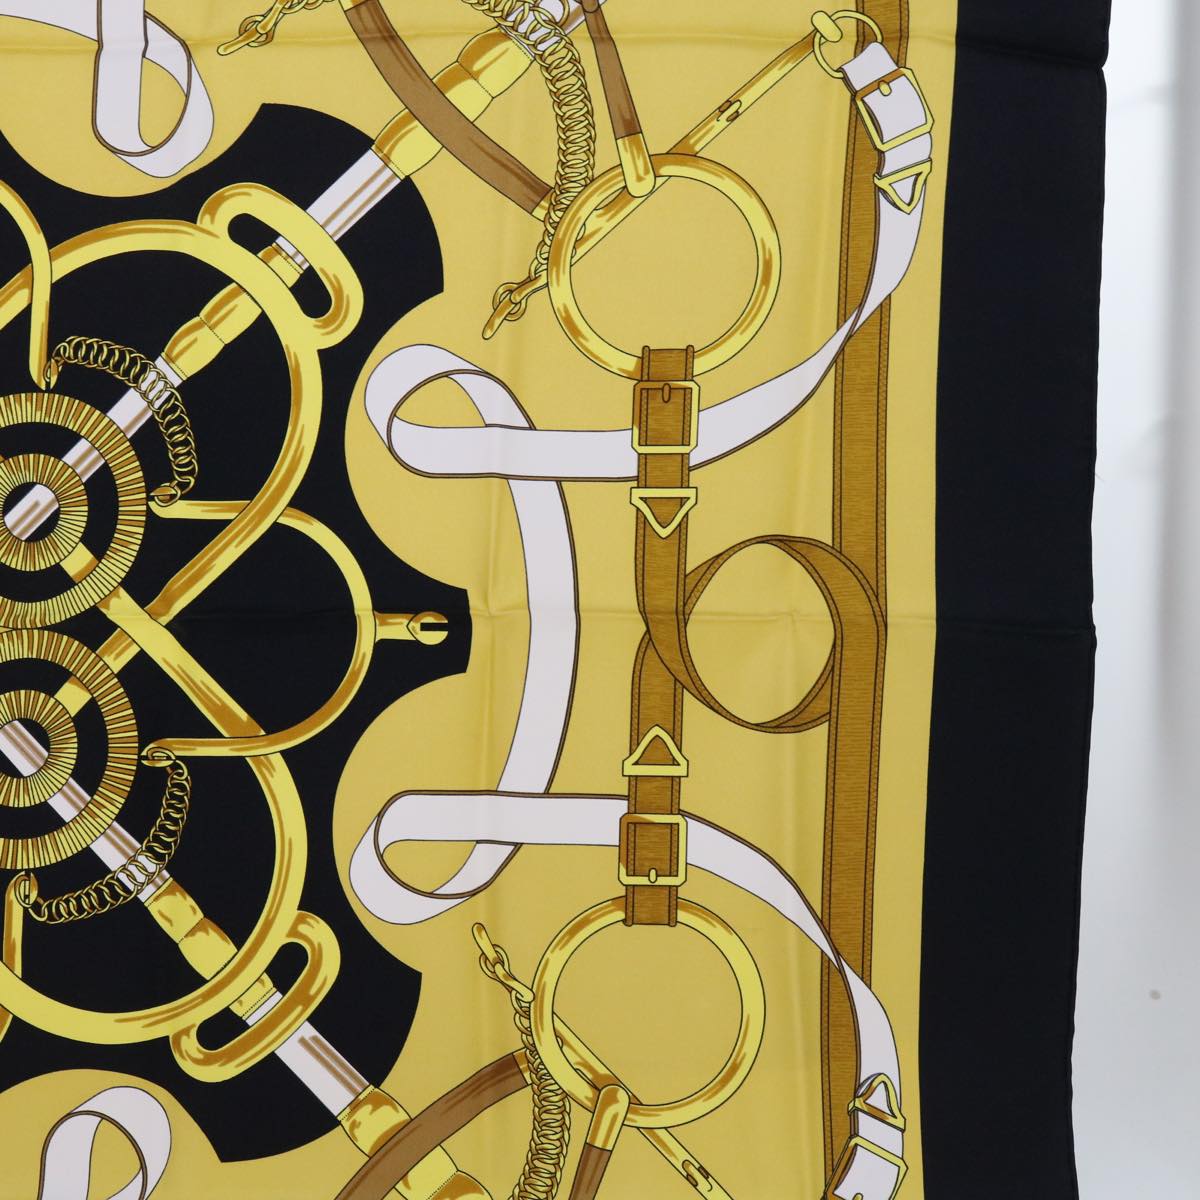 HERMES Carre 90 Eperon d'or Scarf Silk Gold Black Auth hk1056